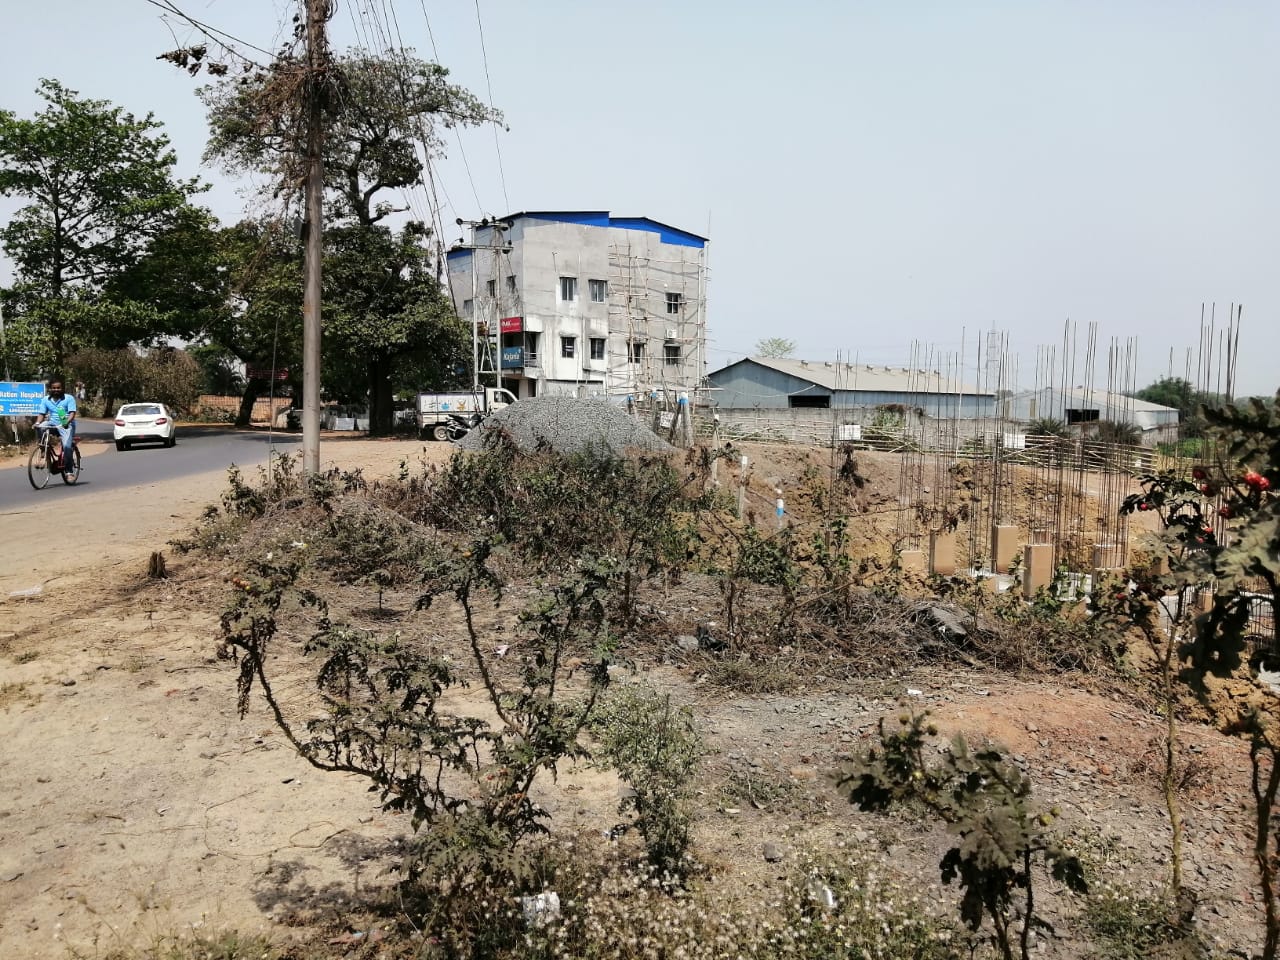 site view